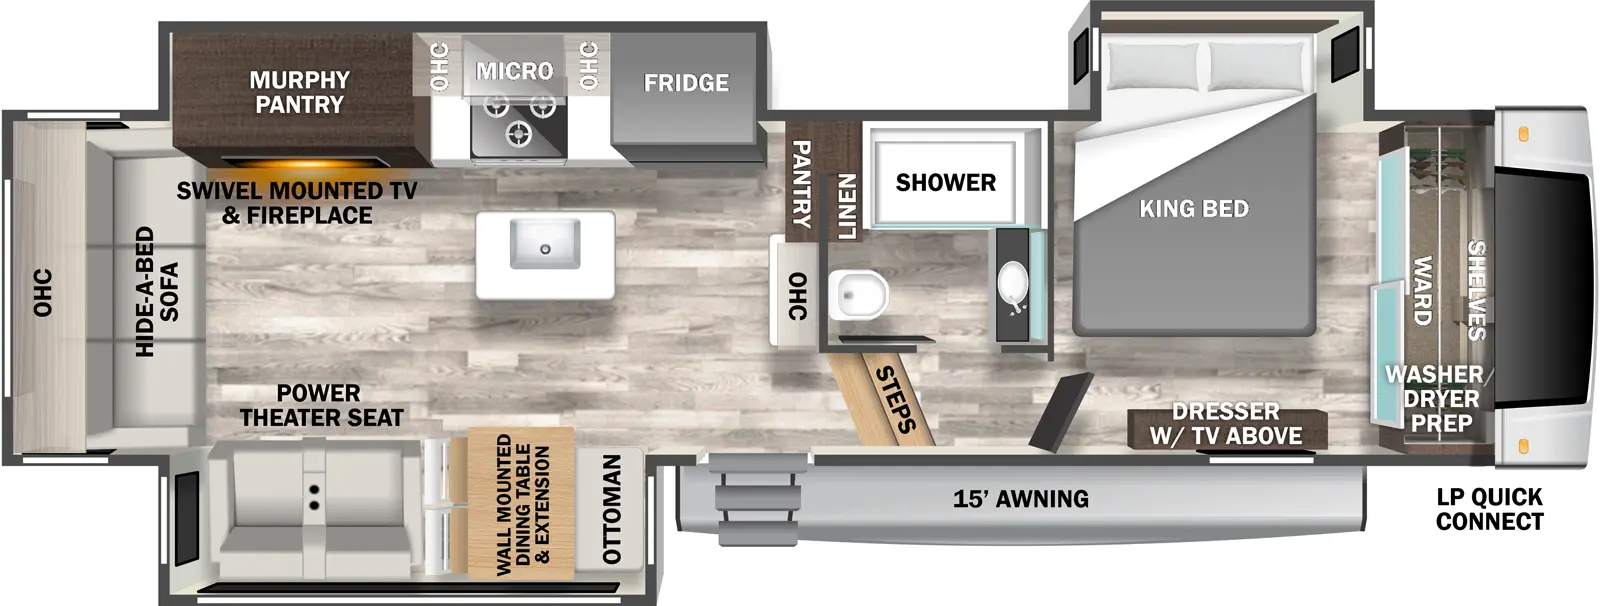 The 2925RL has three slideouts and one entry. Exterior features a 15 foot awning and LP quick connect. Interior layout front to back: front wardrobe with shelves and washer/dryer prep, off-door side king bed slideout, and door side dresser with TV above; off-door side full bathroom linen closet; two steps down to the main living area an entry; pantry and overhead cabinet along inner wall; kitchen island with sink; off-door side slideout with refrigerator, overhead cabinet, microwave, cooktop, and a murphy pantry with swivel mounted TV and fireplace; door side slideout with wall-mounted dining table, extension, and ottoman, and power theater seats; rear hide-a-bed sofa with overhead cabinet.